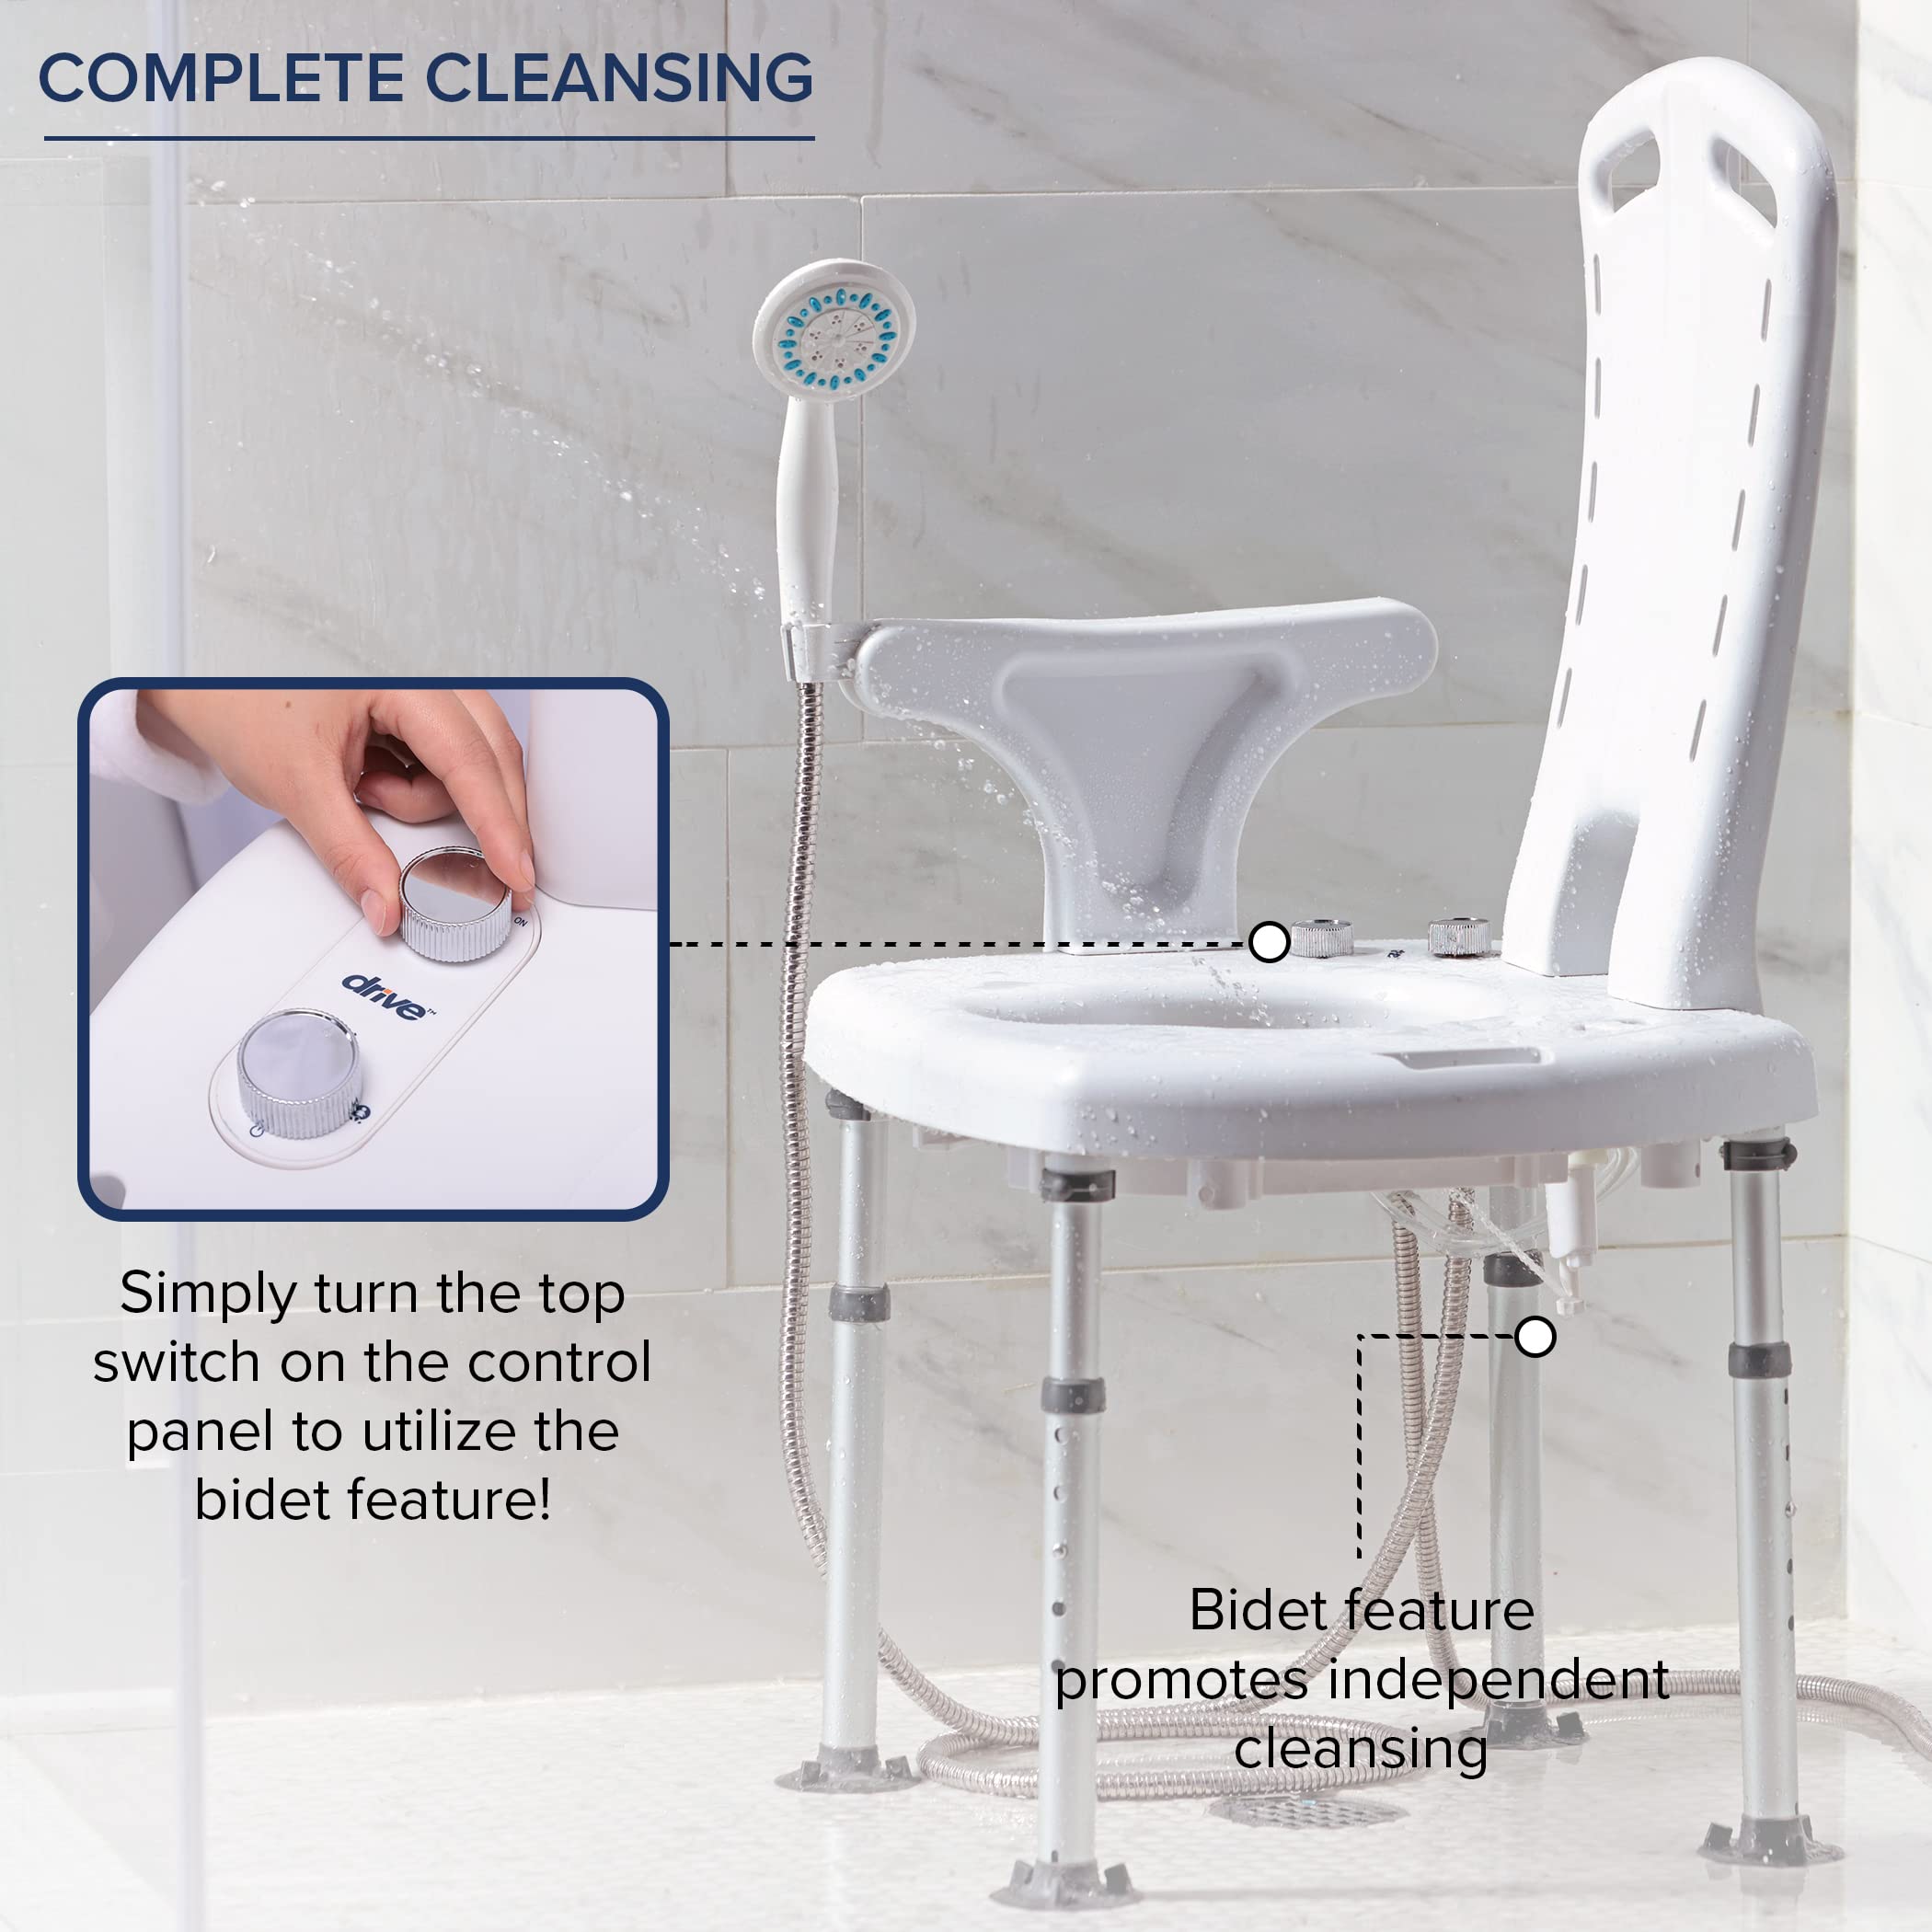 Drive Medical PreserveTech Aquachair Bathing System with Bidet, Premium Shower Chair with Back, Arms & Shower Sprayer, Tub Chair with Cutout Seat, Bath & Shower Chair, Shower Commode Chair